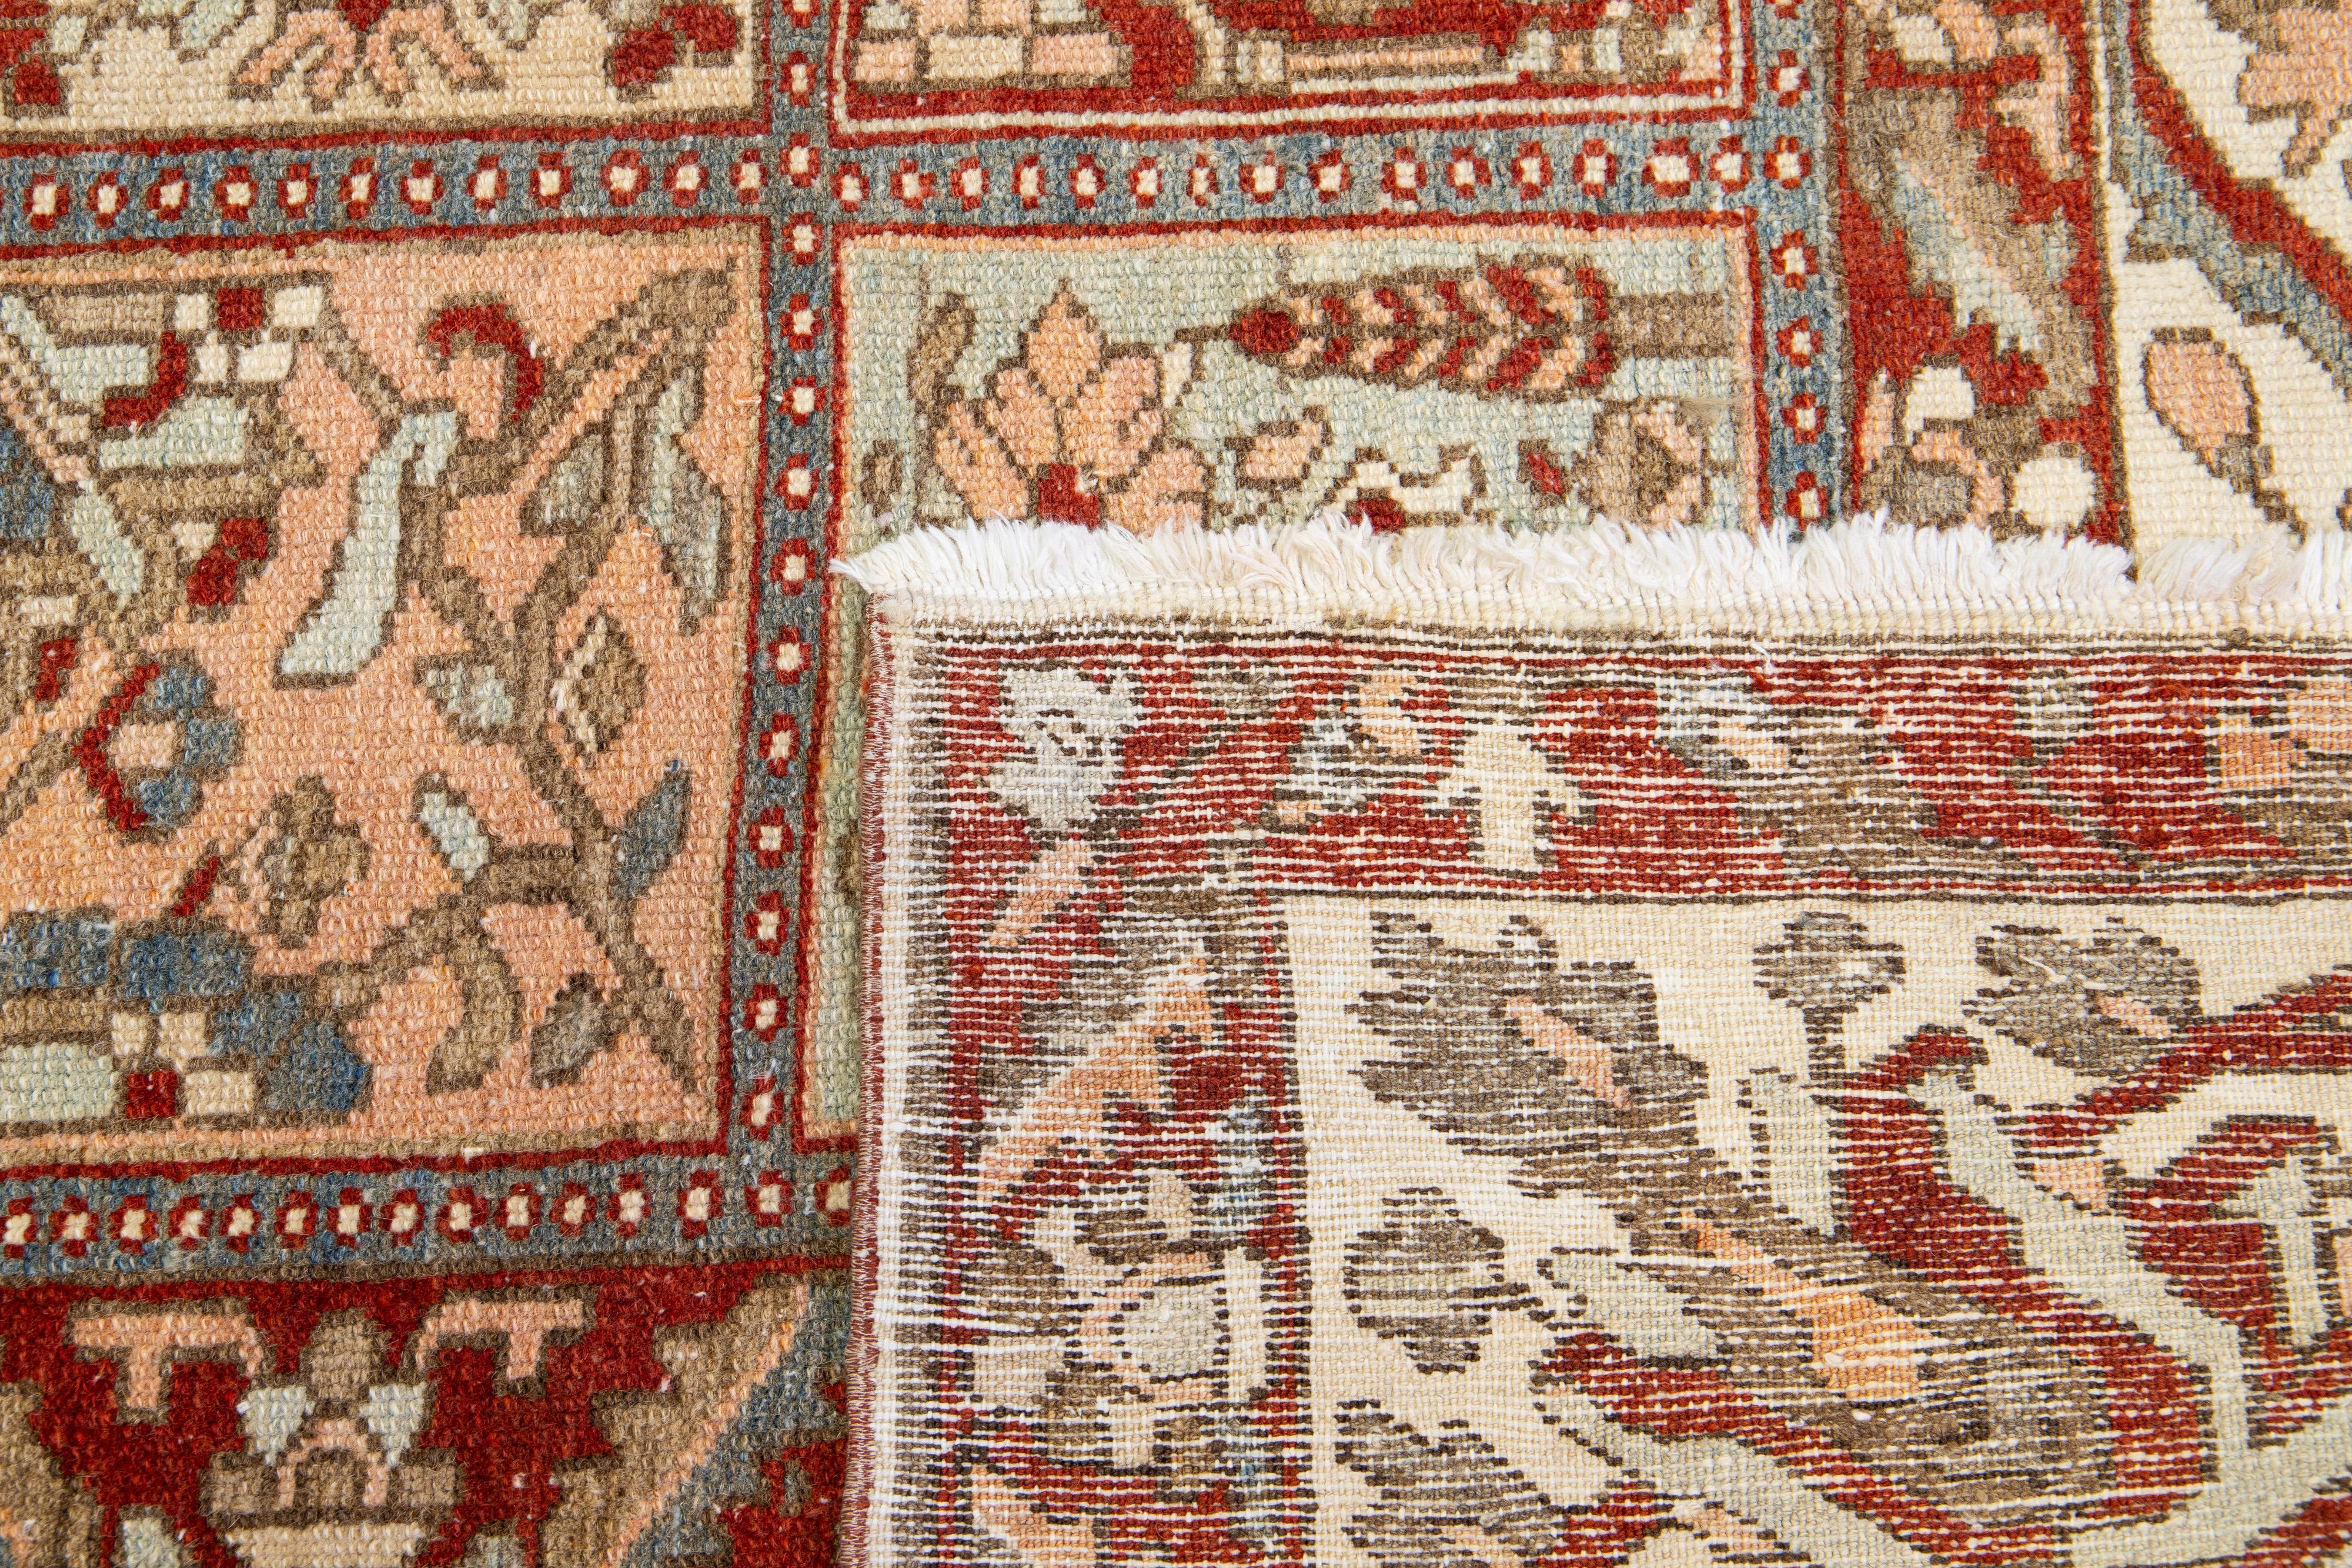 The Floral Persian Bakhtiari Rust Wool Rug Handcrafted in the 1920s (Wolle) im Angebot